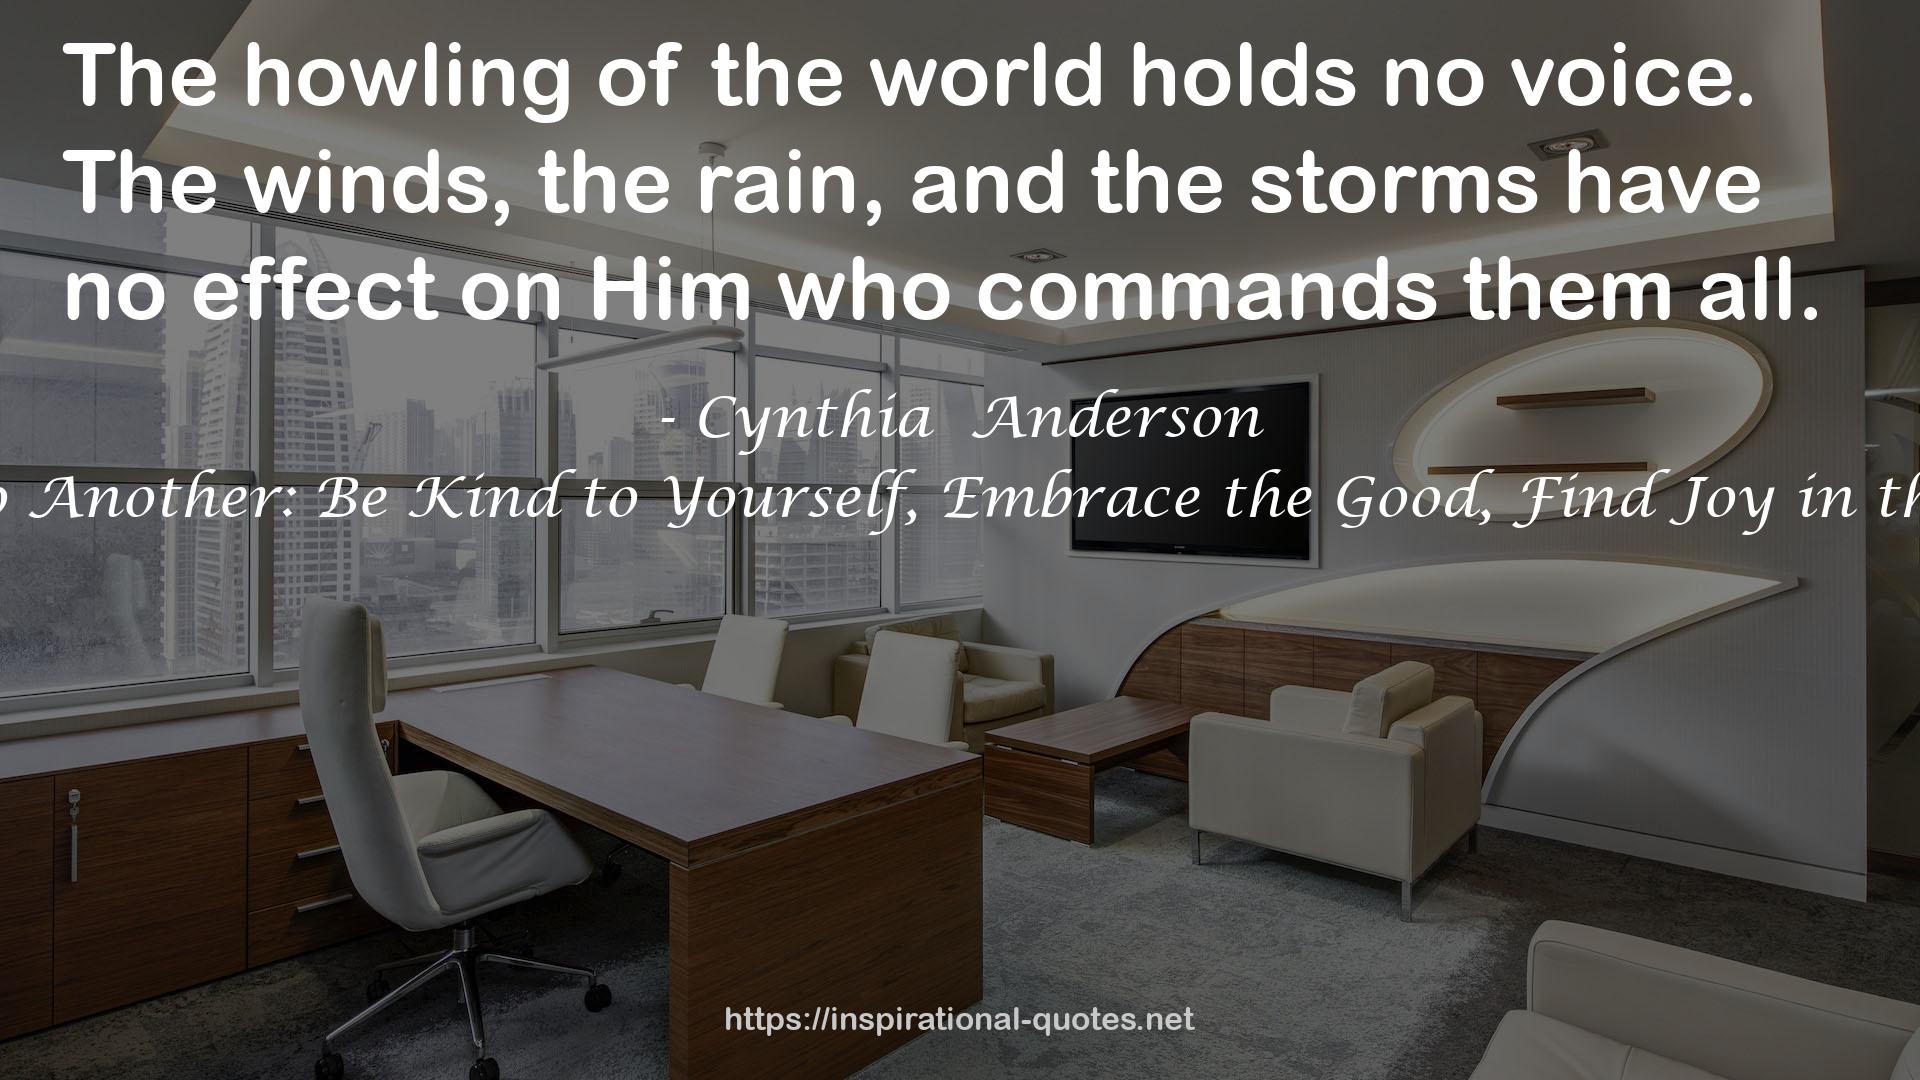 One Mom to Another: Be Kind to Yourself, Embrace the Good, Find Joy in the Everyday QUOTES